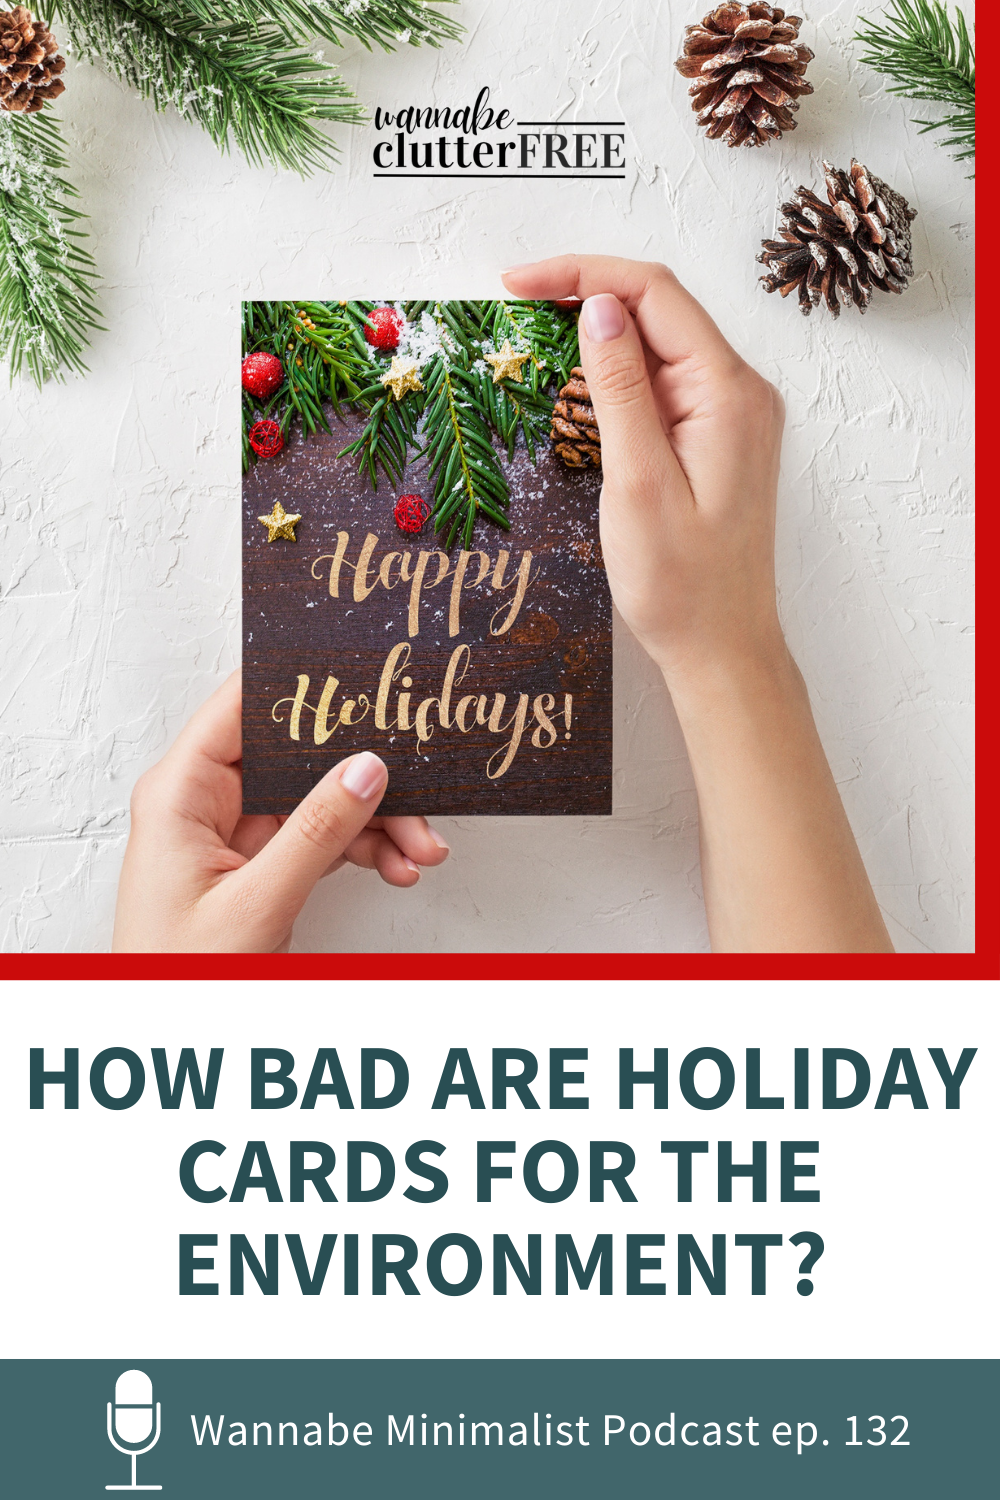 How Bad Are Holiday Cards for the Environment?